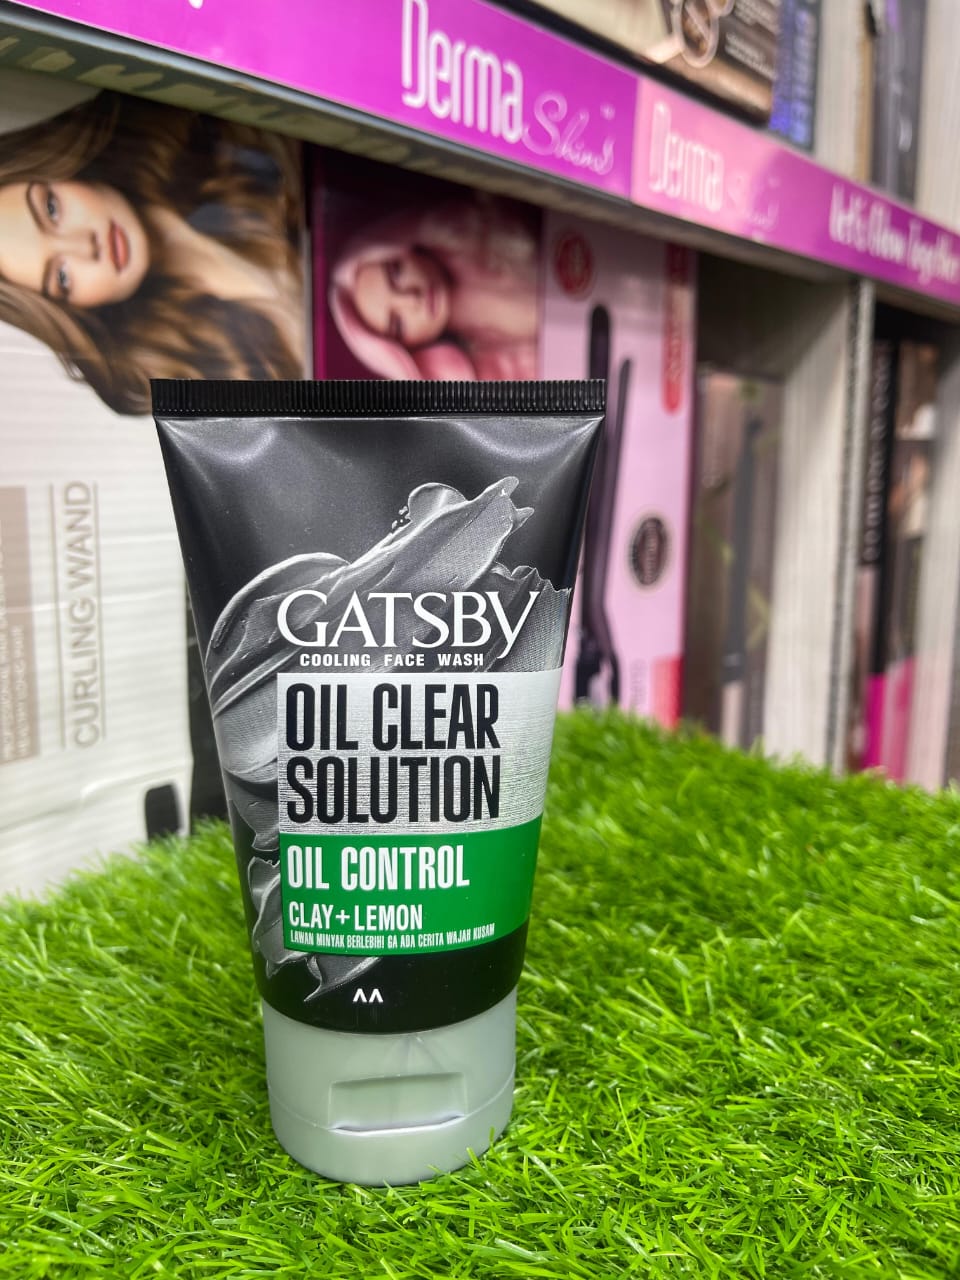 Gatsby Oil Clear Solution Oil Control Face Wash for Men